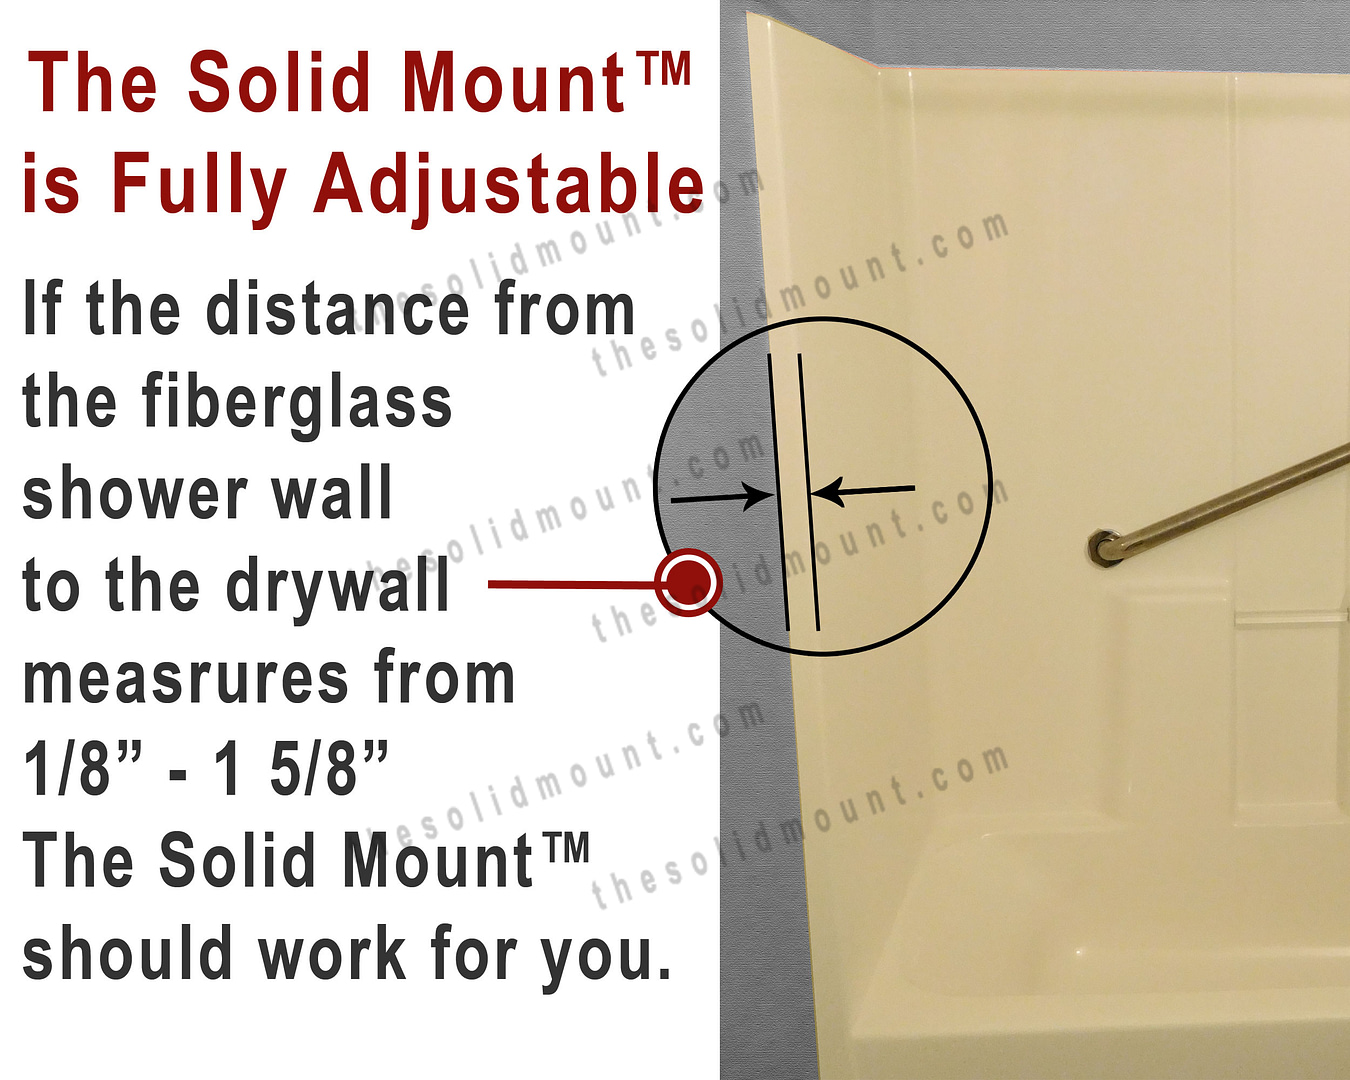 The Solid Mount Grab Bar Mounting System for Fiberglass Showers Measureing